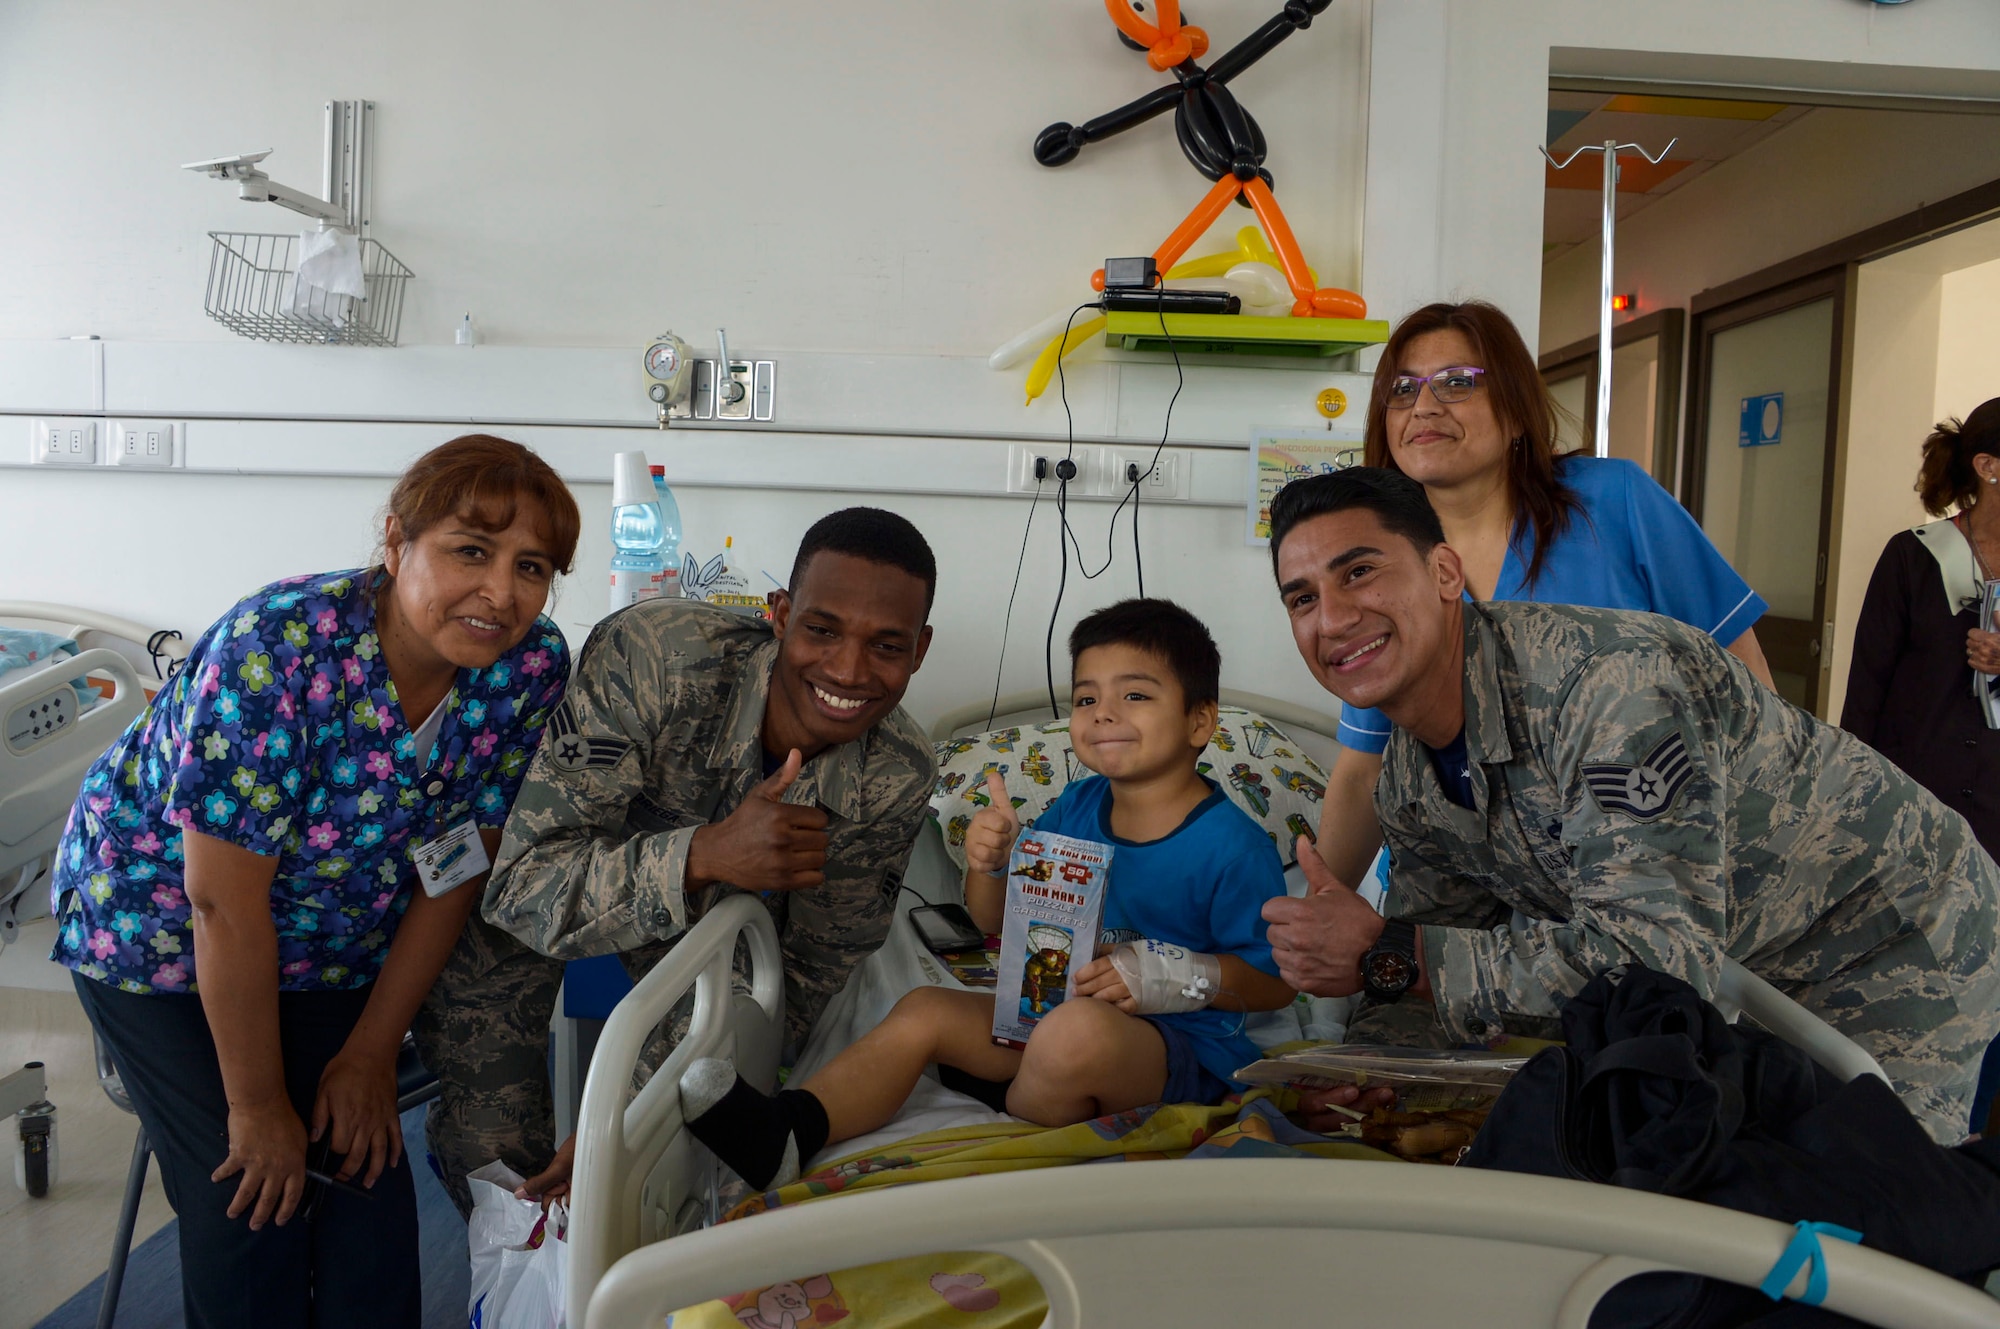 Senior Airman Tyrell Noriega and Staff Sgt. Juan Gomez-Navarro, F-22 Demonstration Team members, pose with a child at San Juan de Dios hospital in Santiago, Chile, March 31, 2016.  The Airmen are in Chile to participate in the 2016 FIDAE Air and Space Trade Show and spent some of their down-time visiting children in multiple hospitals.  (U.S. Air Force photo by Tech. Sgt. Heather Redman/Released)